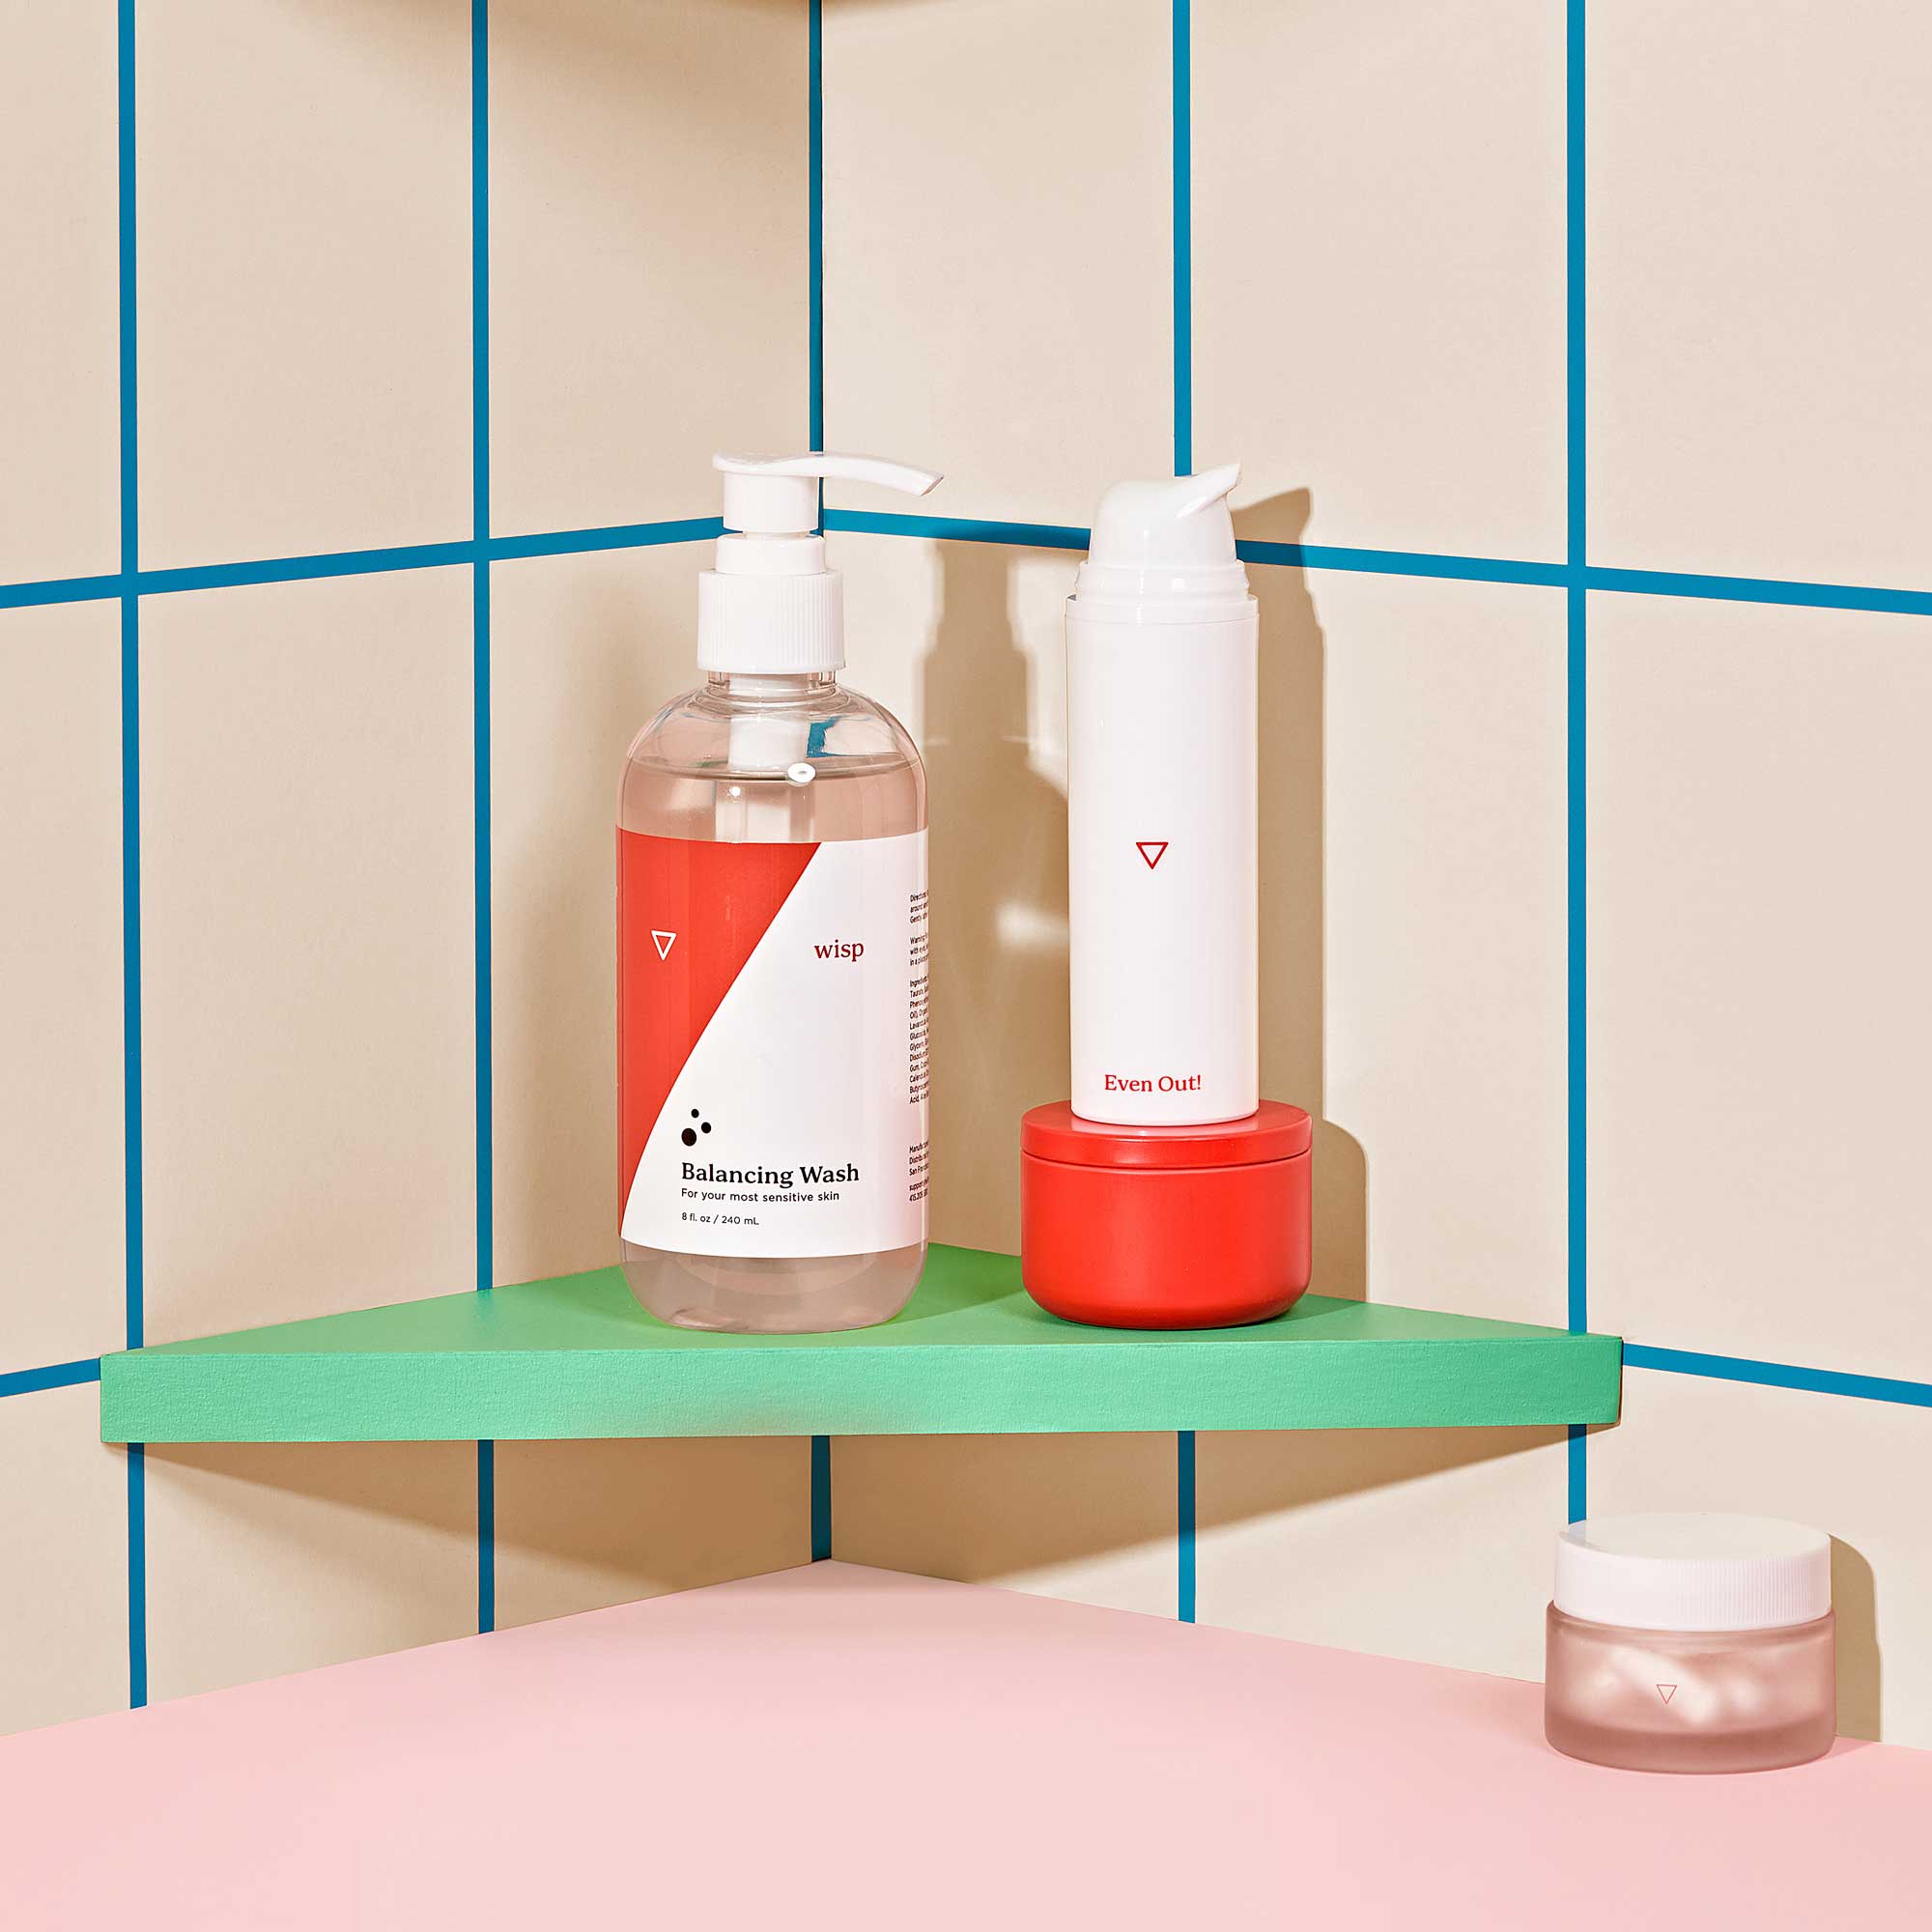 Wisp Balancing Wash, Hydroquinone Cream, and pill bottle in shower with colorful background